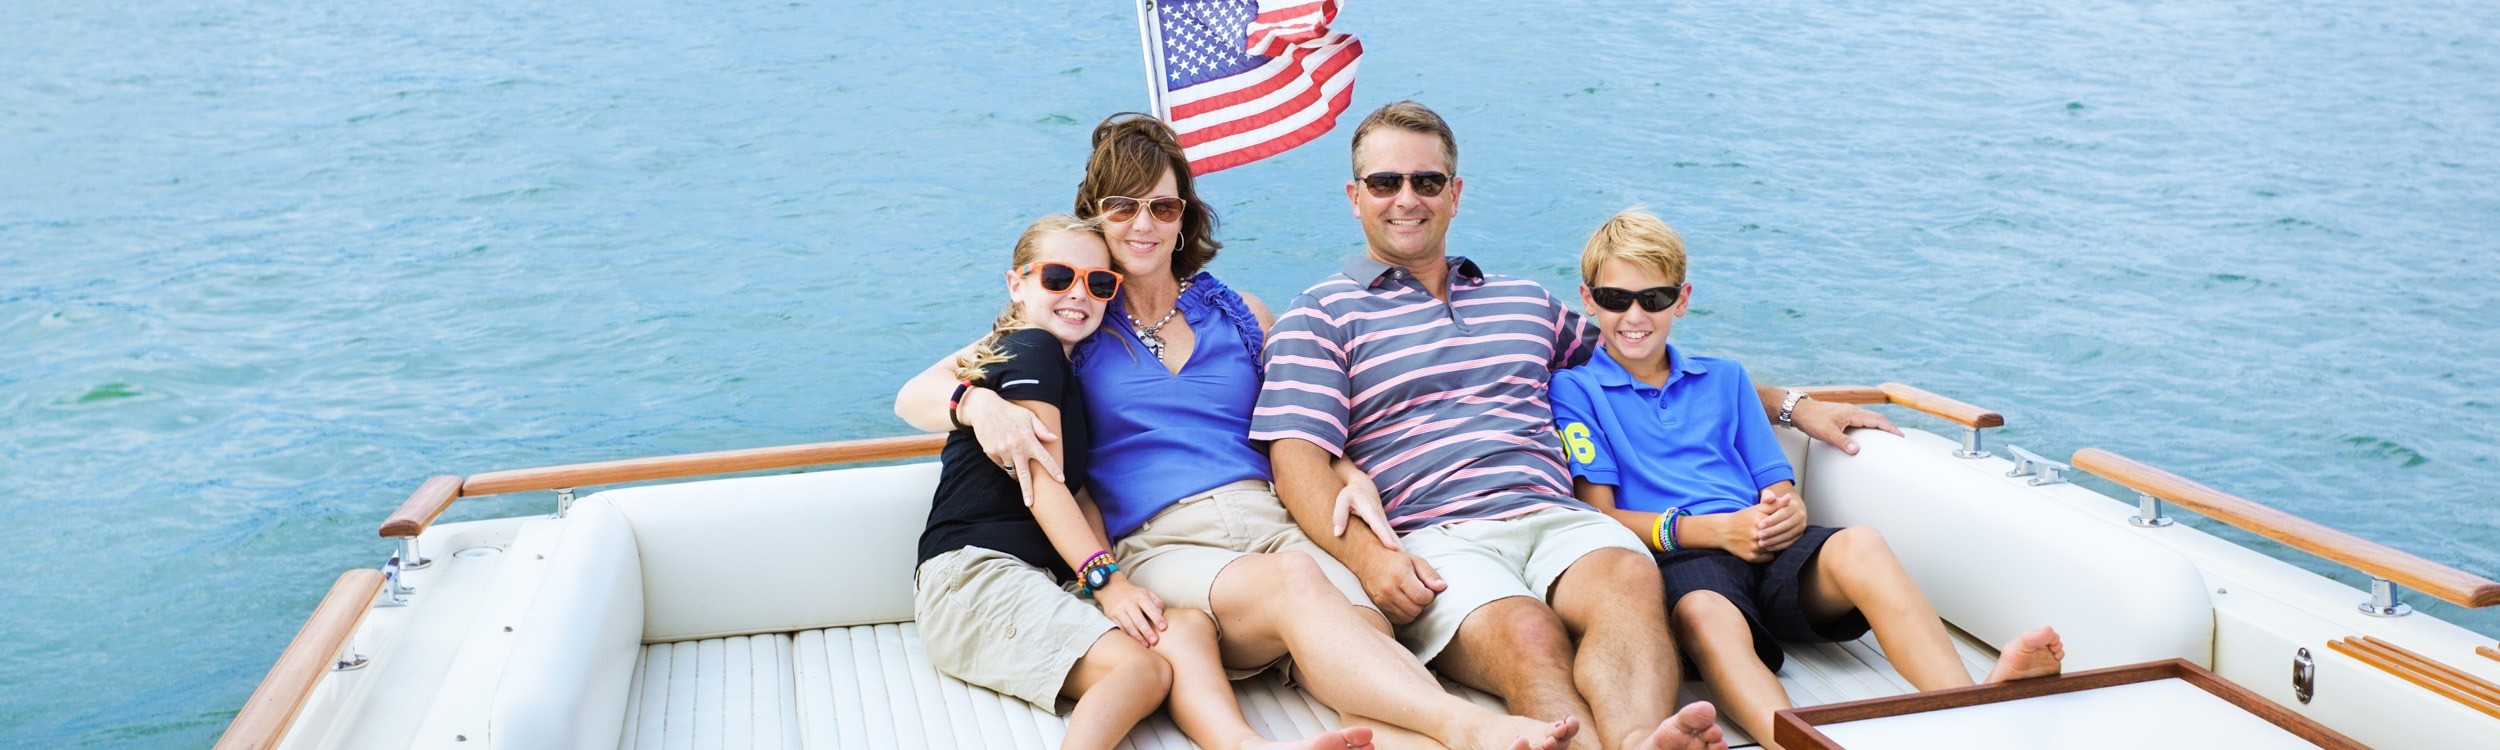 familuy photo on a boat